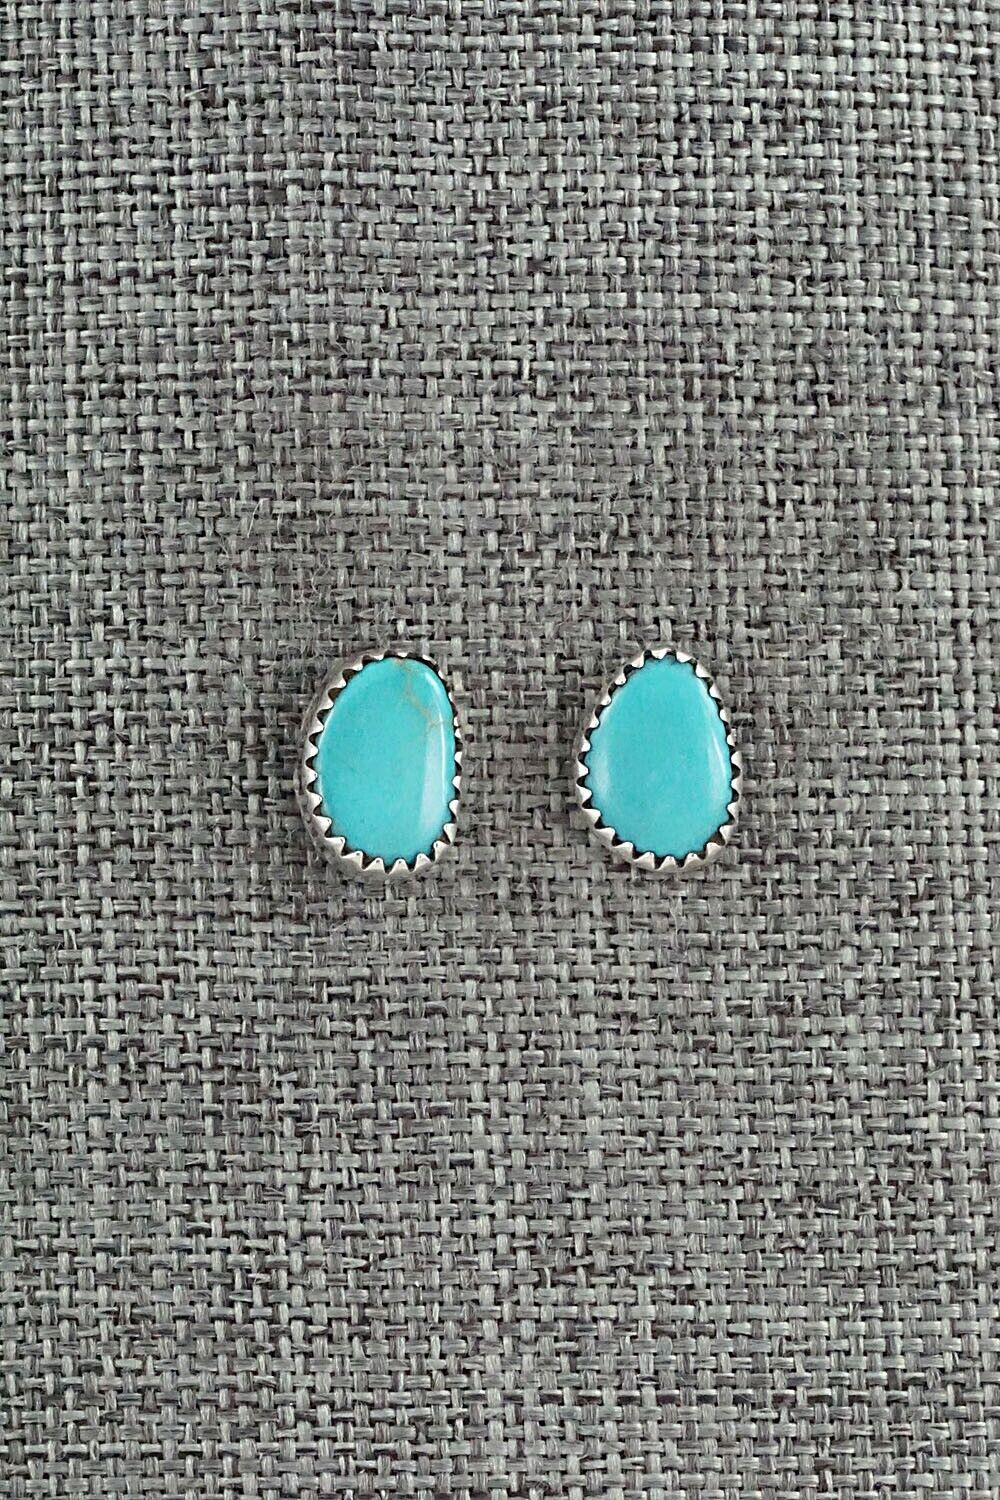 Turquoise & Sterling Silver Earrings - Theresa Smith